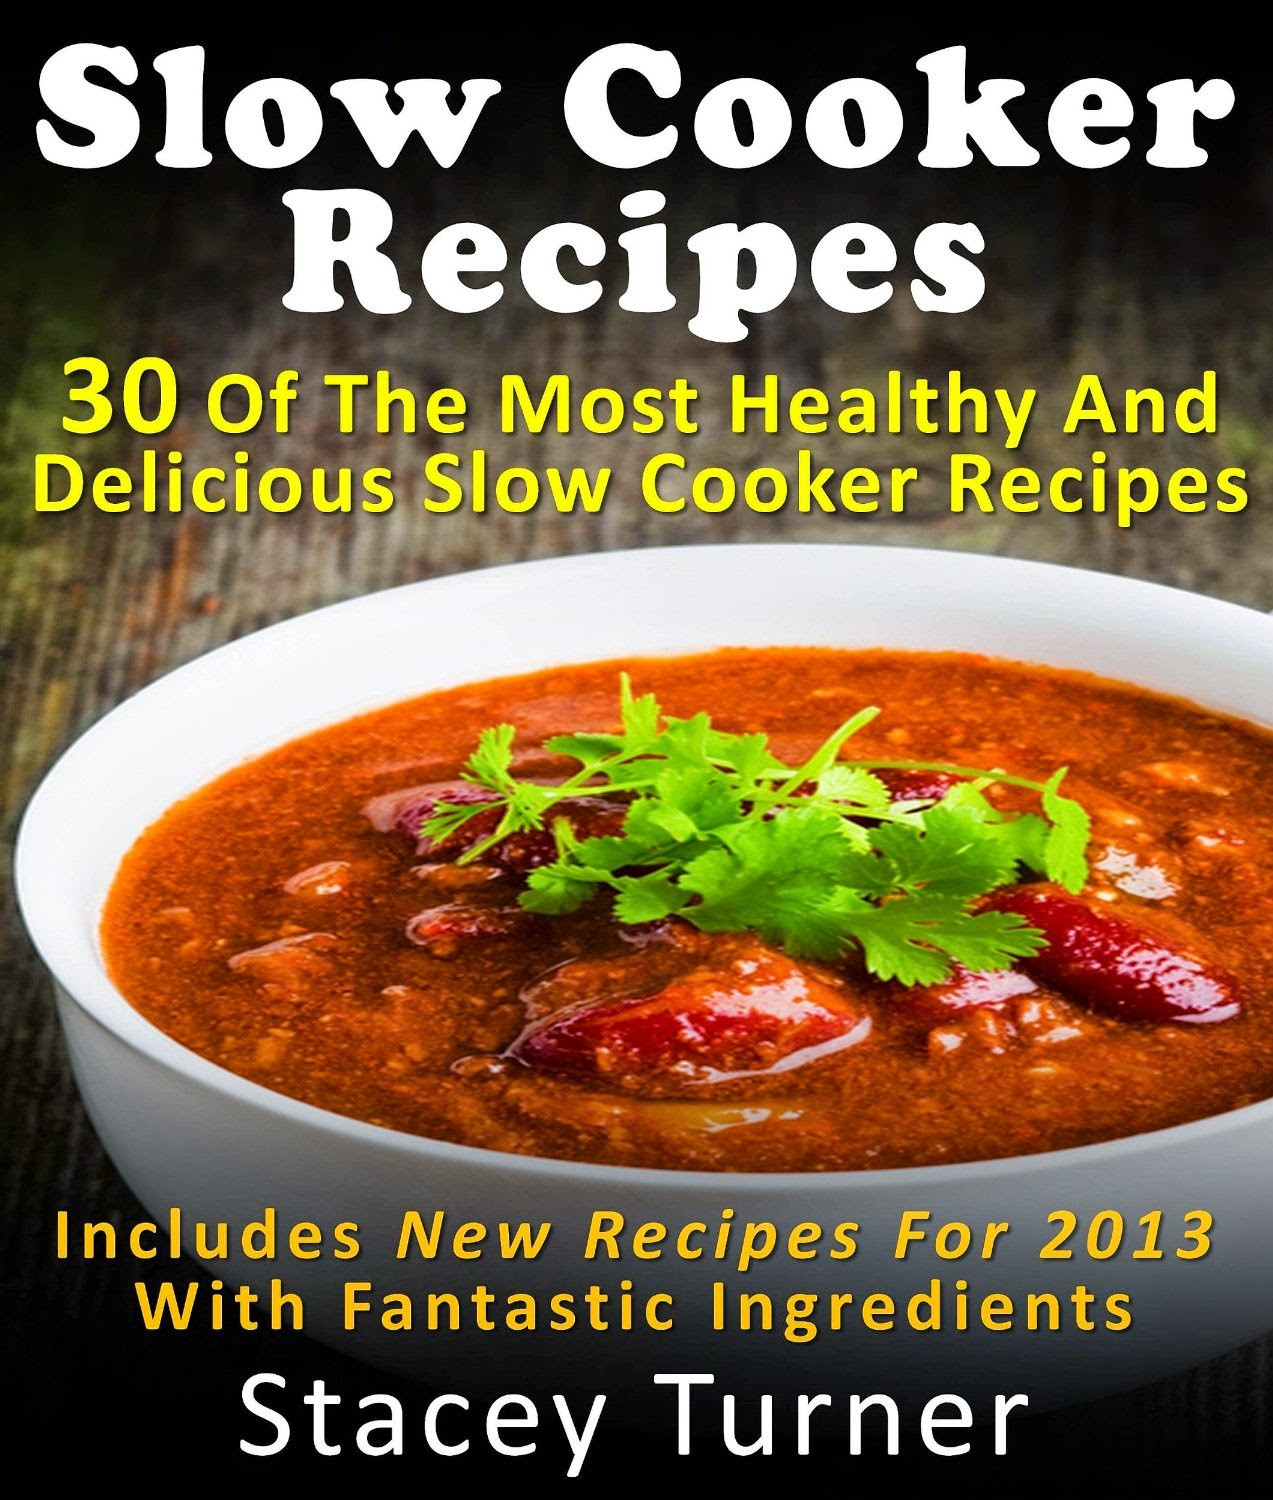 Delicious Healthy Slow Cooker Recipes
 Frugal Mom and Wife FREE 30 The Most Healthy And